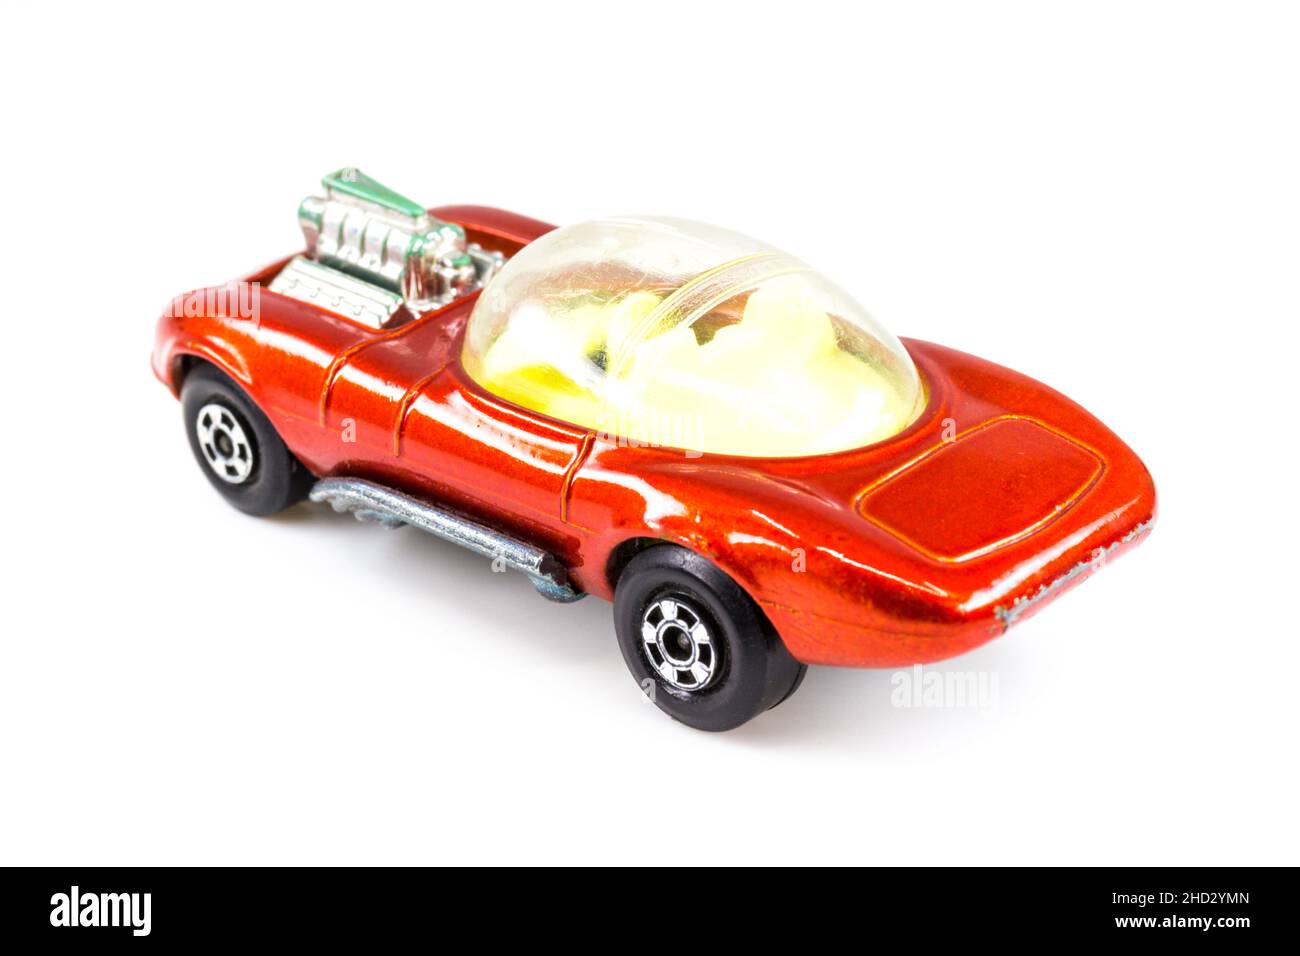 Lesney Products Matchbox model toy car 1-75 series no. 36 Draguar Stock Photo